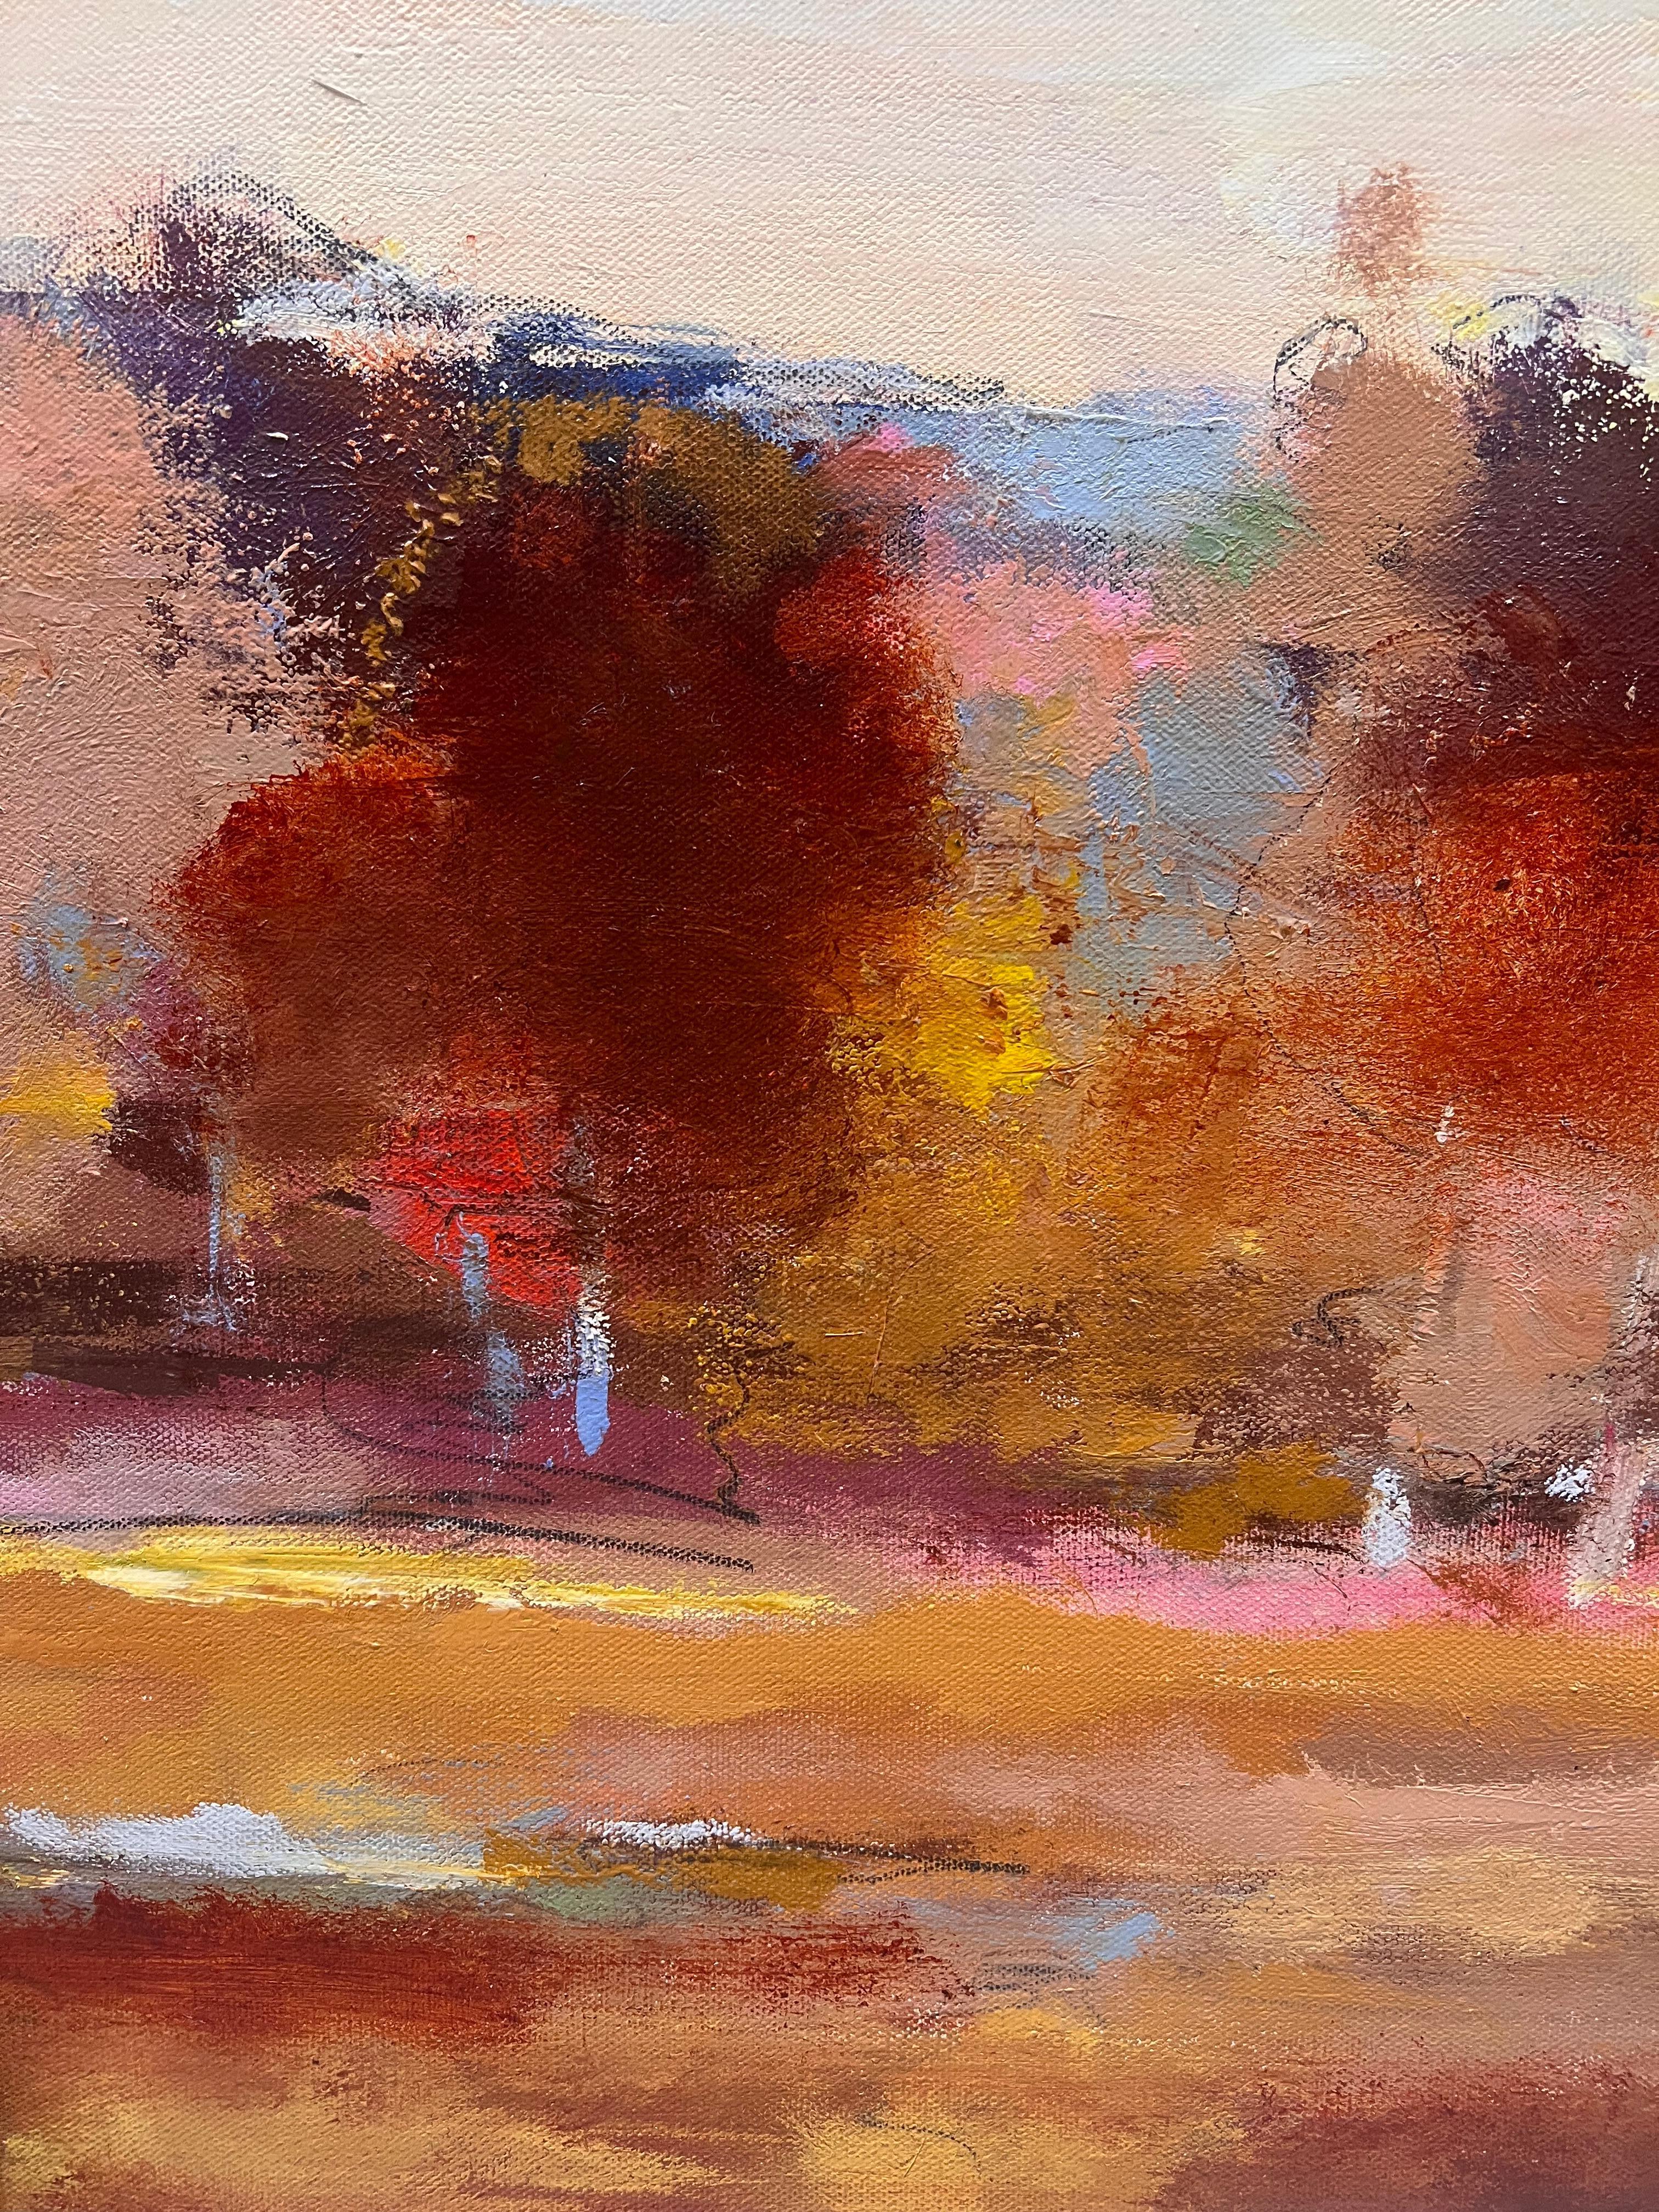 Changing Seasons - Impressionist Painting by Noah Desmond